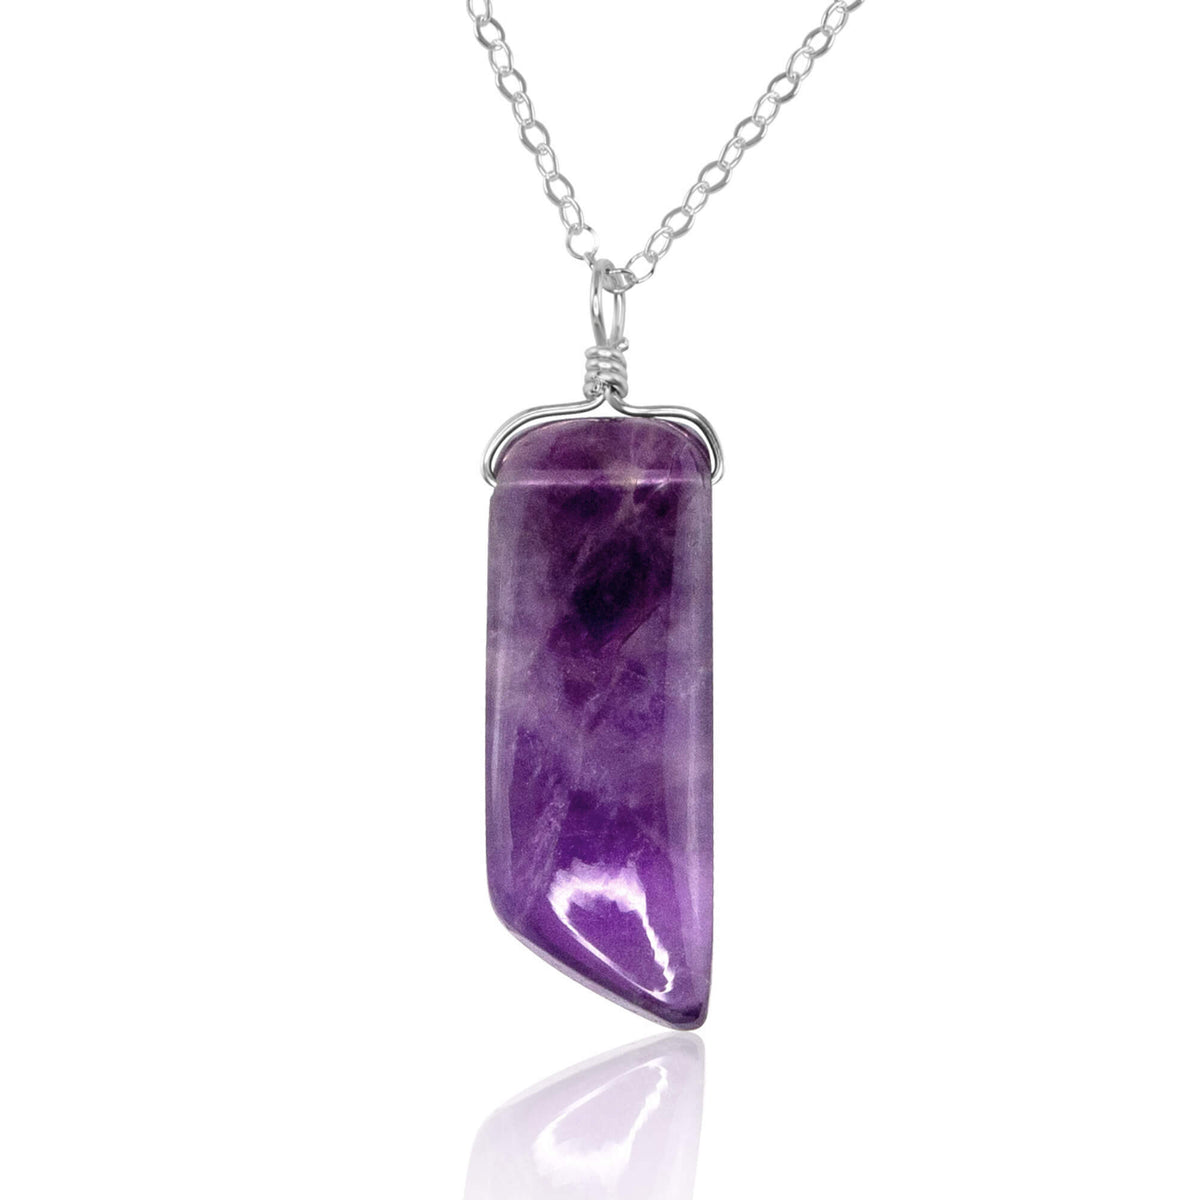 Smooth Point Pendant Necklace - Amethyst - Sterling Silver - Luna Tide Handmade Jewellery